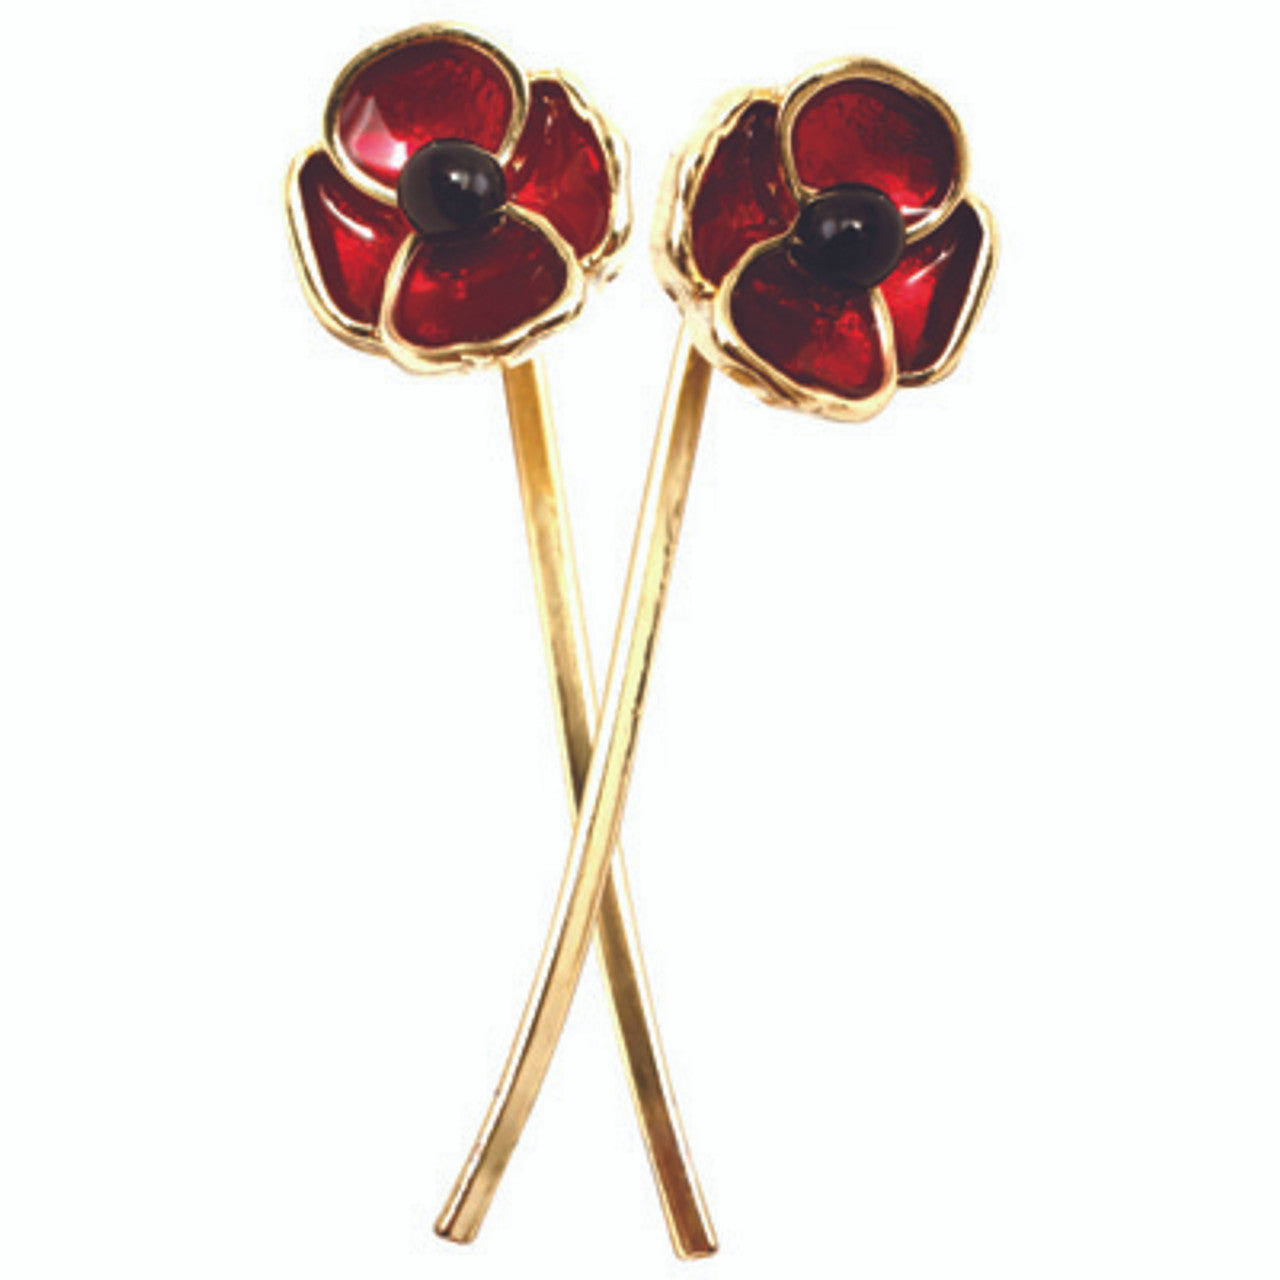 Gallipoli Centenary Poppy Stem Earrings are a must-have accessory for those who appreciate style and modernity. These earrings, available for order now from the military specialists, are truly special. www.defenceqstore.com.au